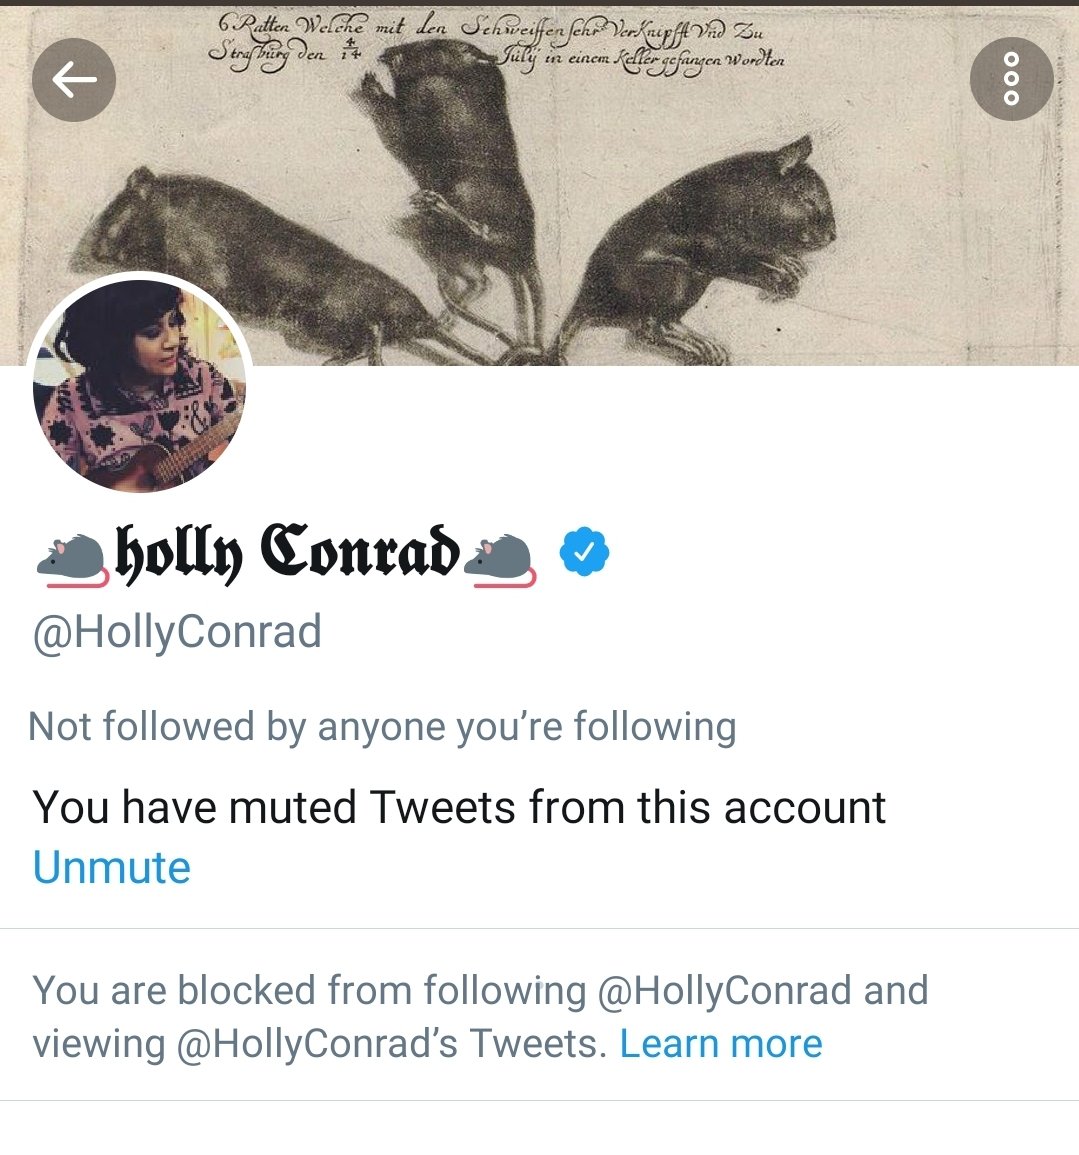 . @HollyConrad You used your mental health-centered platform to call me unfixable and spread the lie that I supposedly had been diagnosed with BPD, contributing to the stigma against the disorder by wielding it as a weapon against someone you don't like.